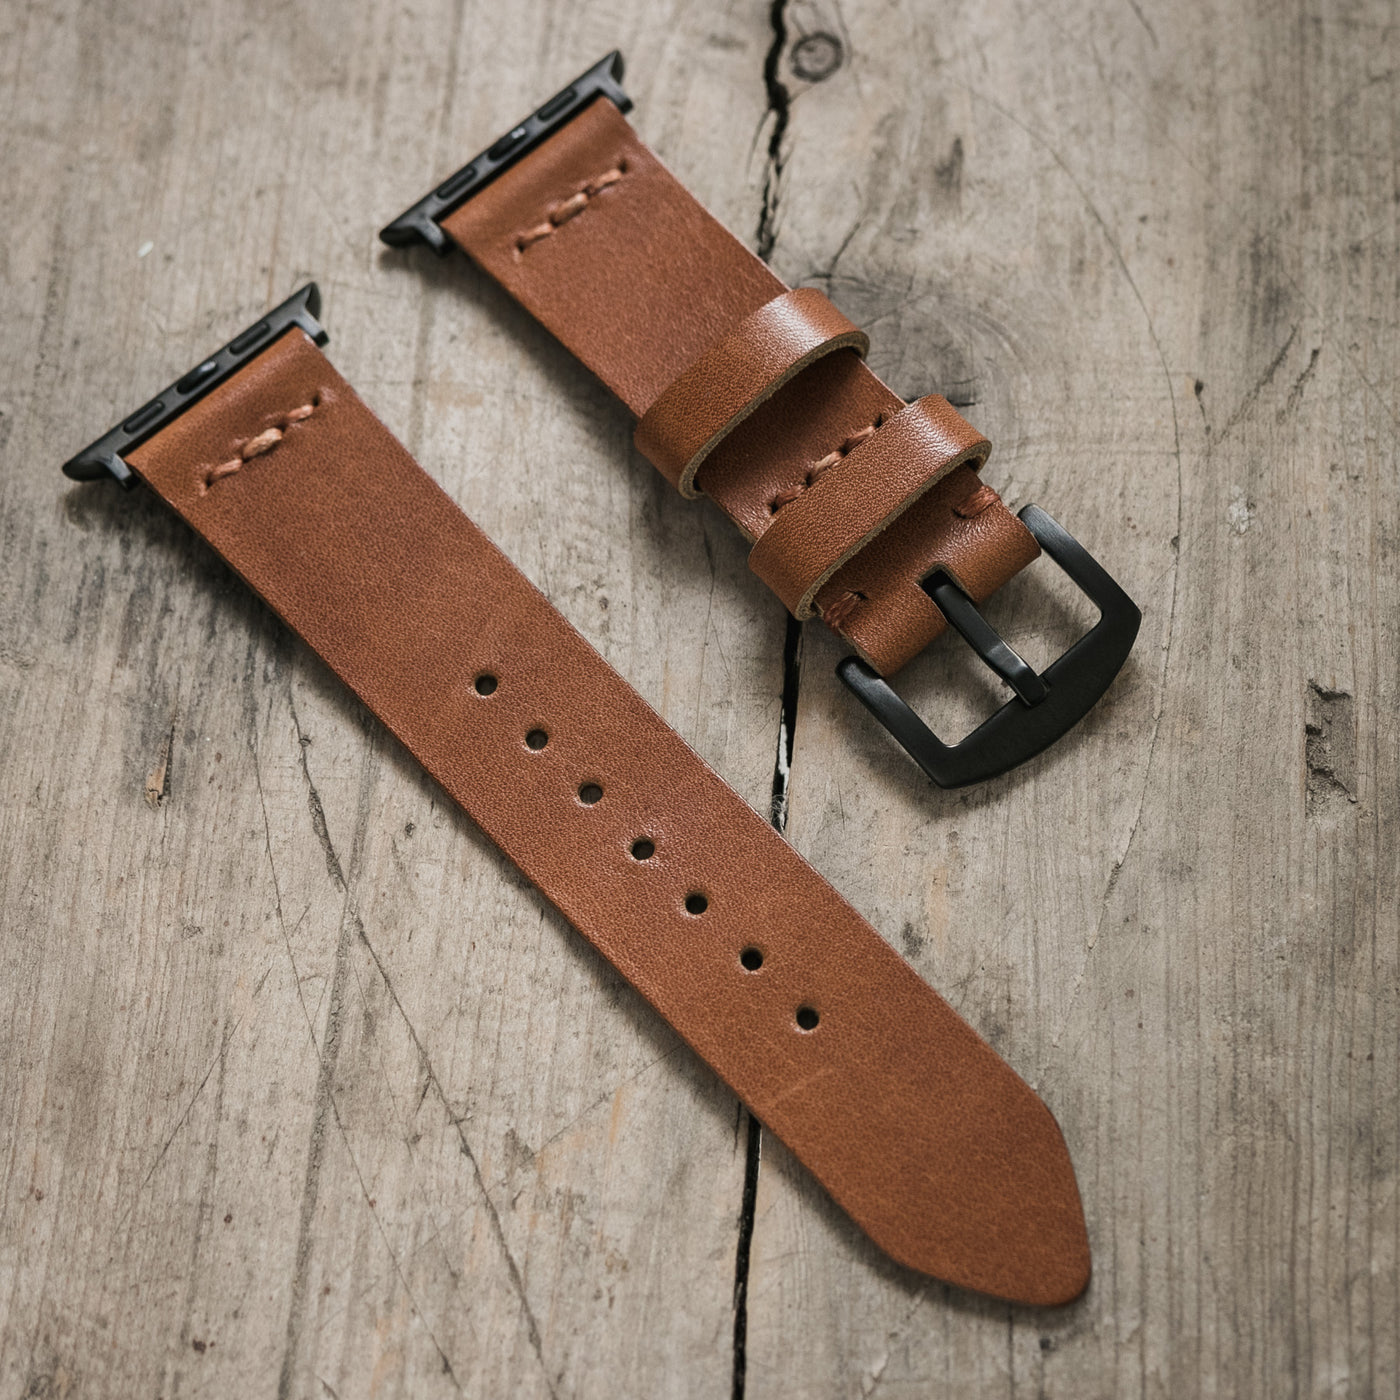 Apple Watch Leather Band - Tan